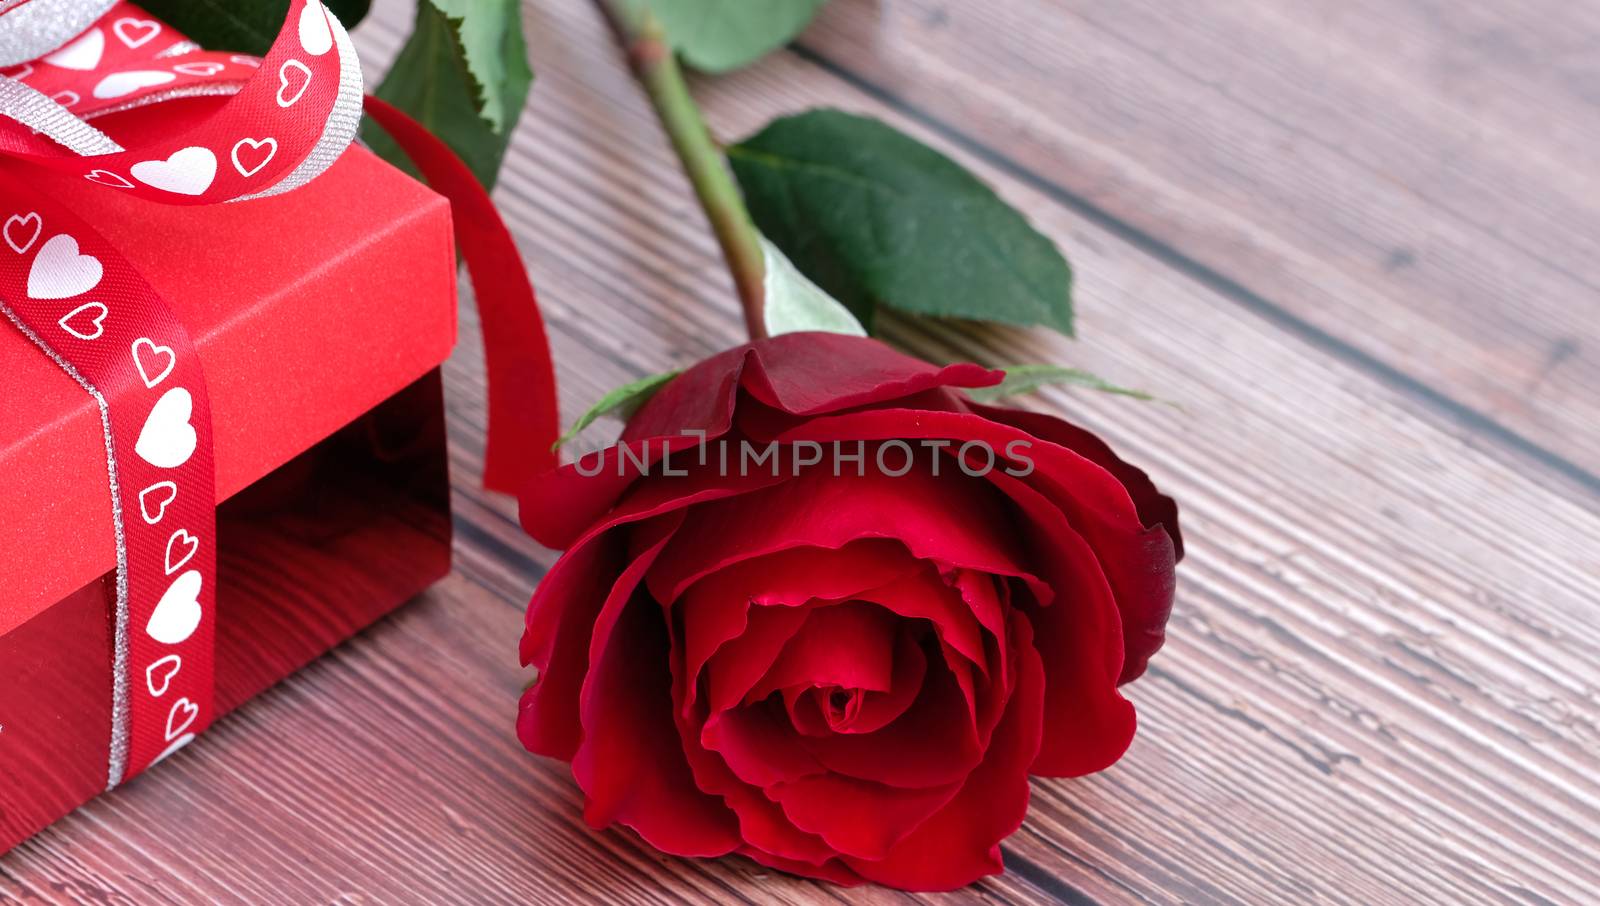 Blooming beautiful red rose and red present box with red and white heart pattern ribbons on brown wooden background. Love, romance, Valentine's Day.